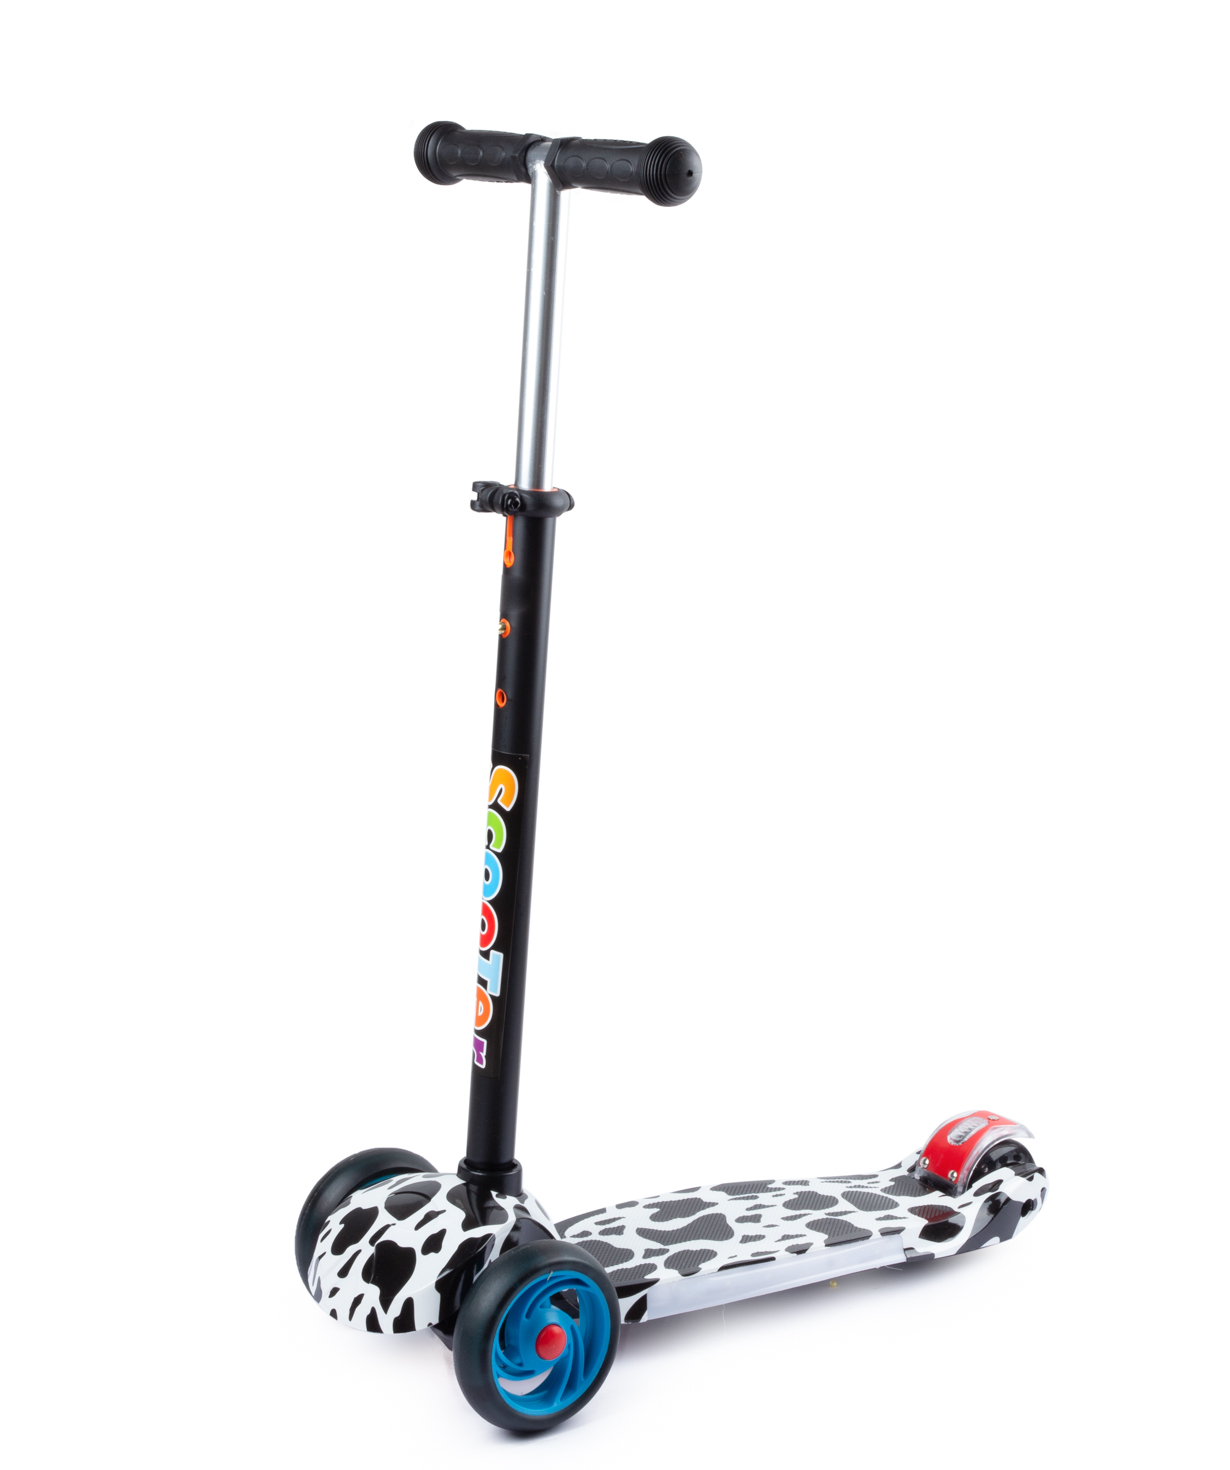 Scooter PE-9908 with light effect